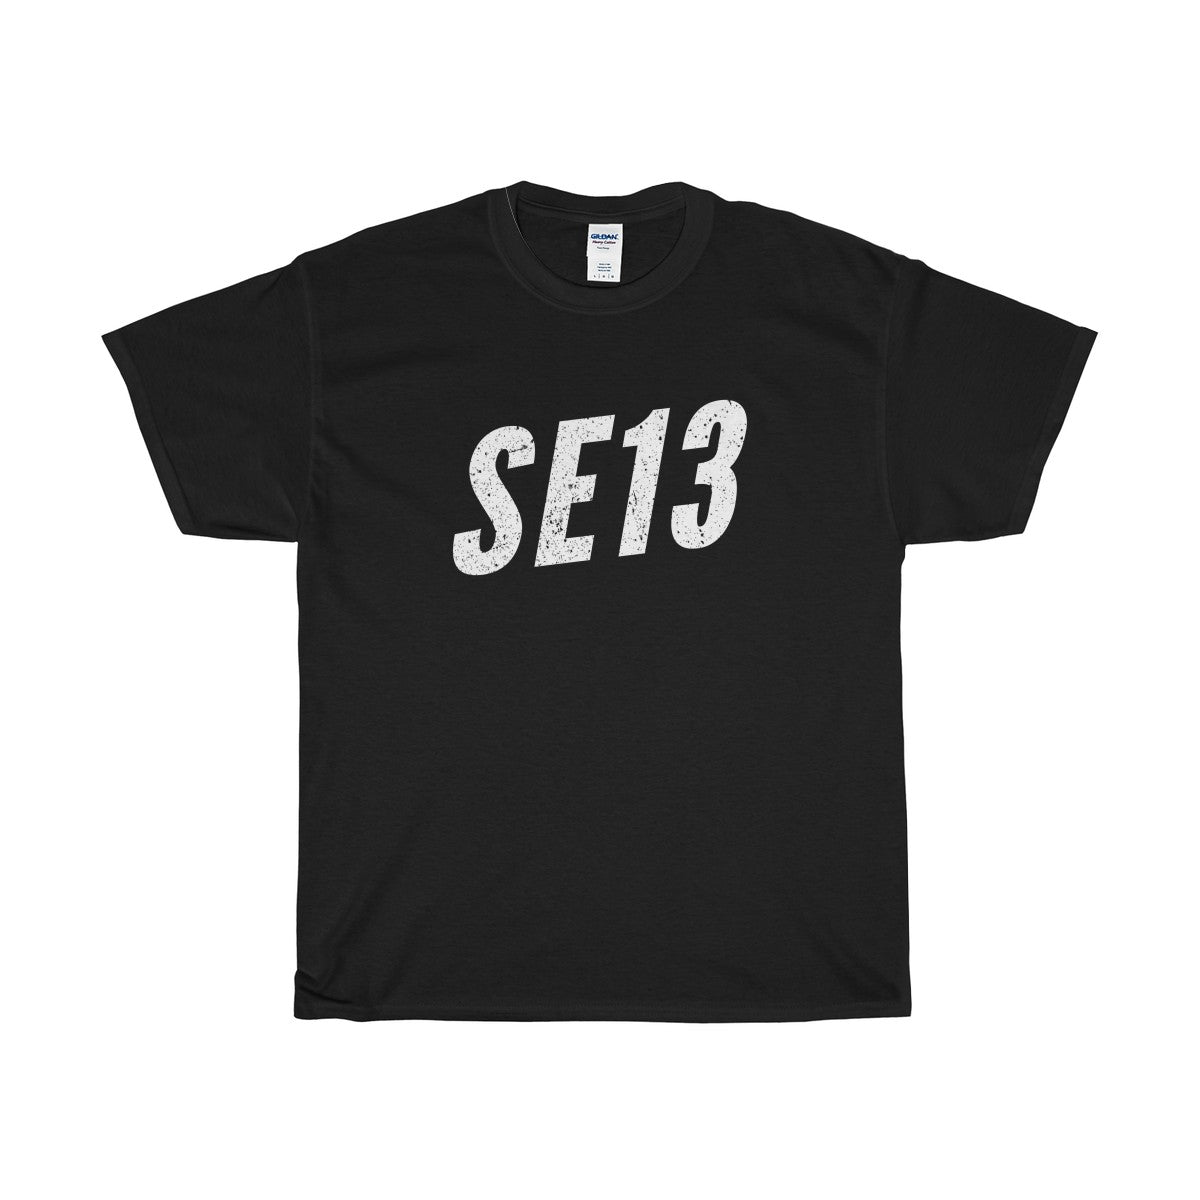 Hither Green SE13 T-Shirt